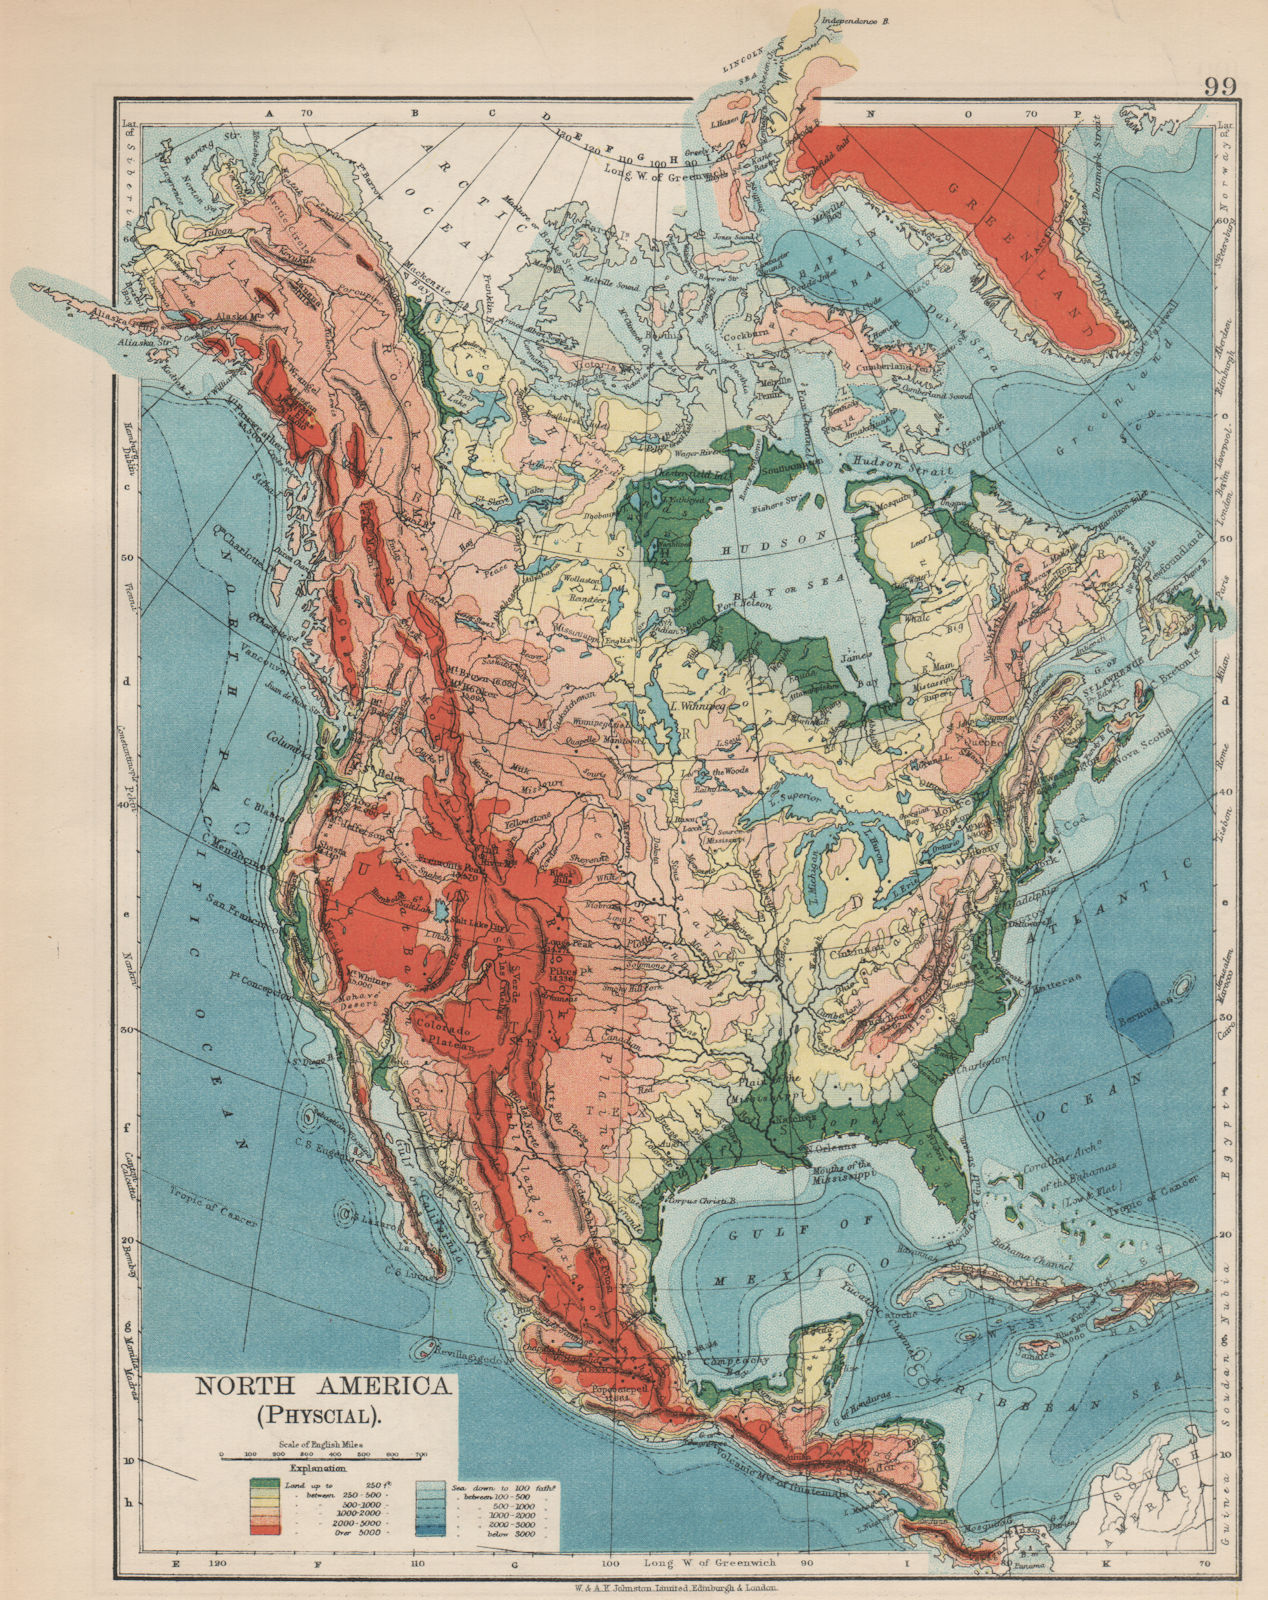 Associate Product NORTH AMERICA PHYSICAL. Relief. Key mountains heights. Ocean depths  1903 map